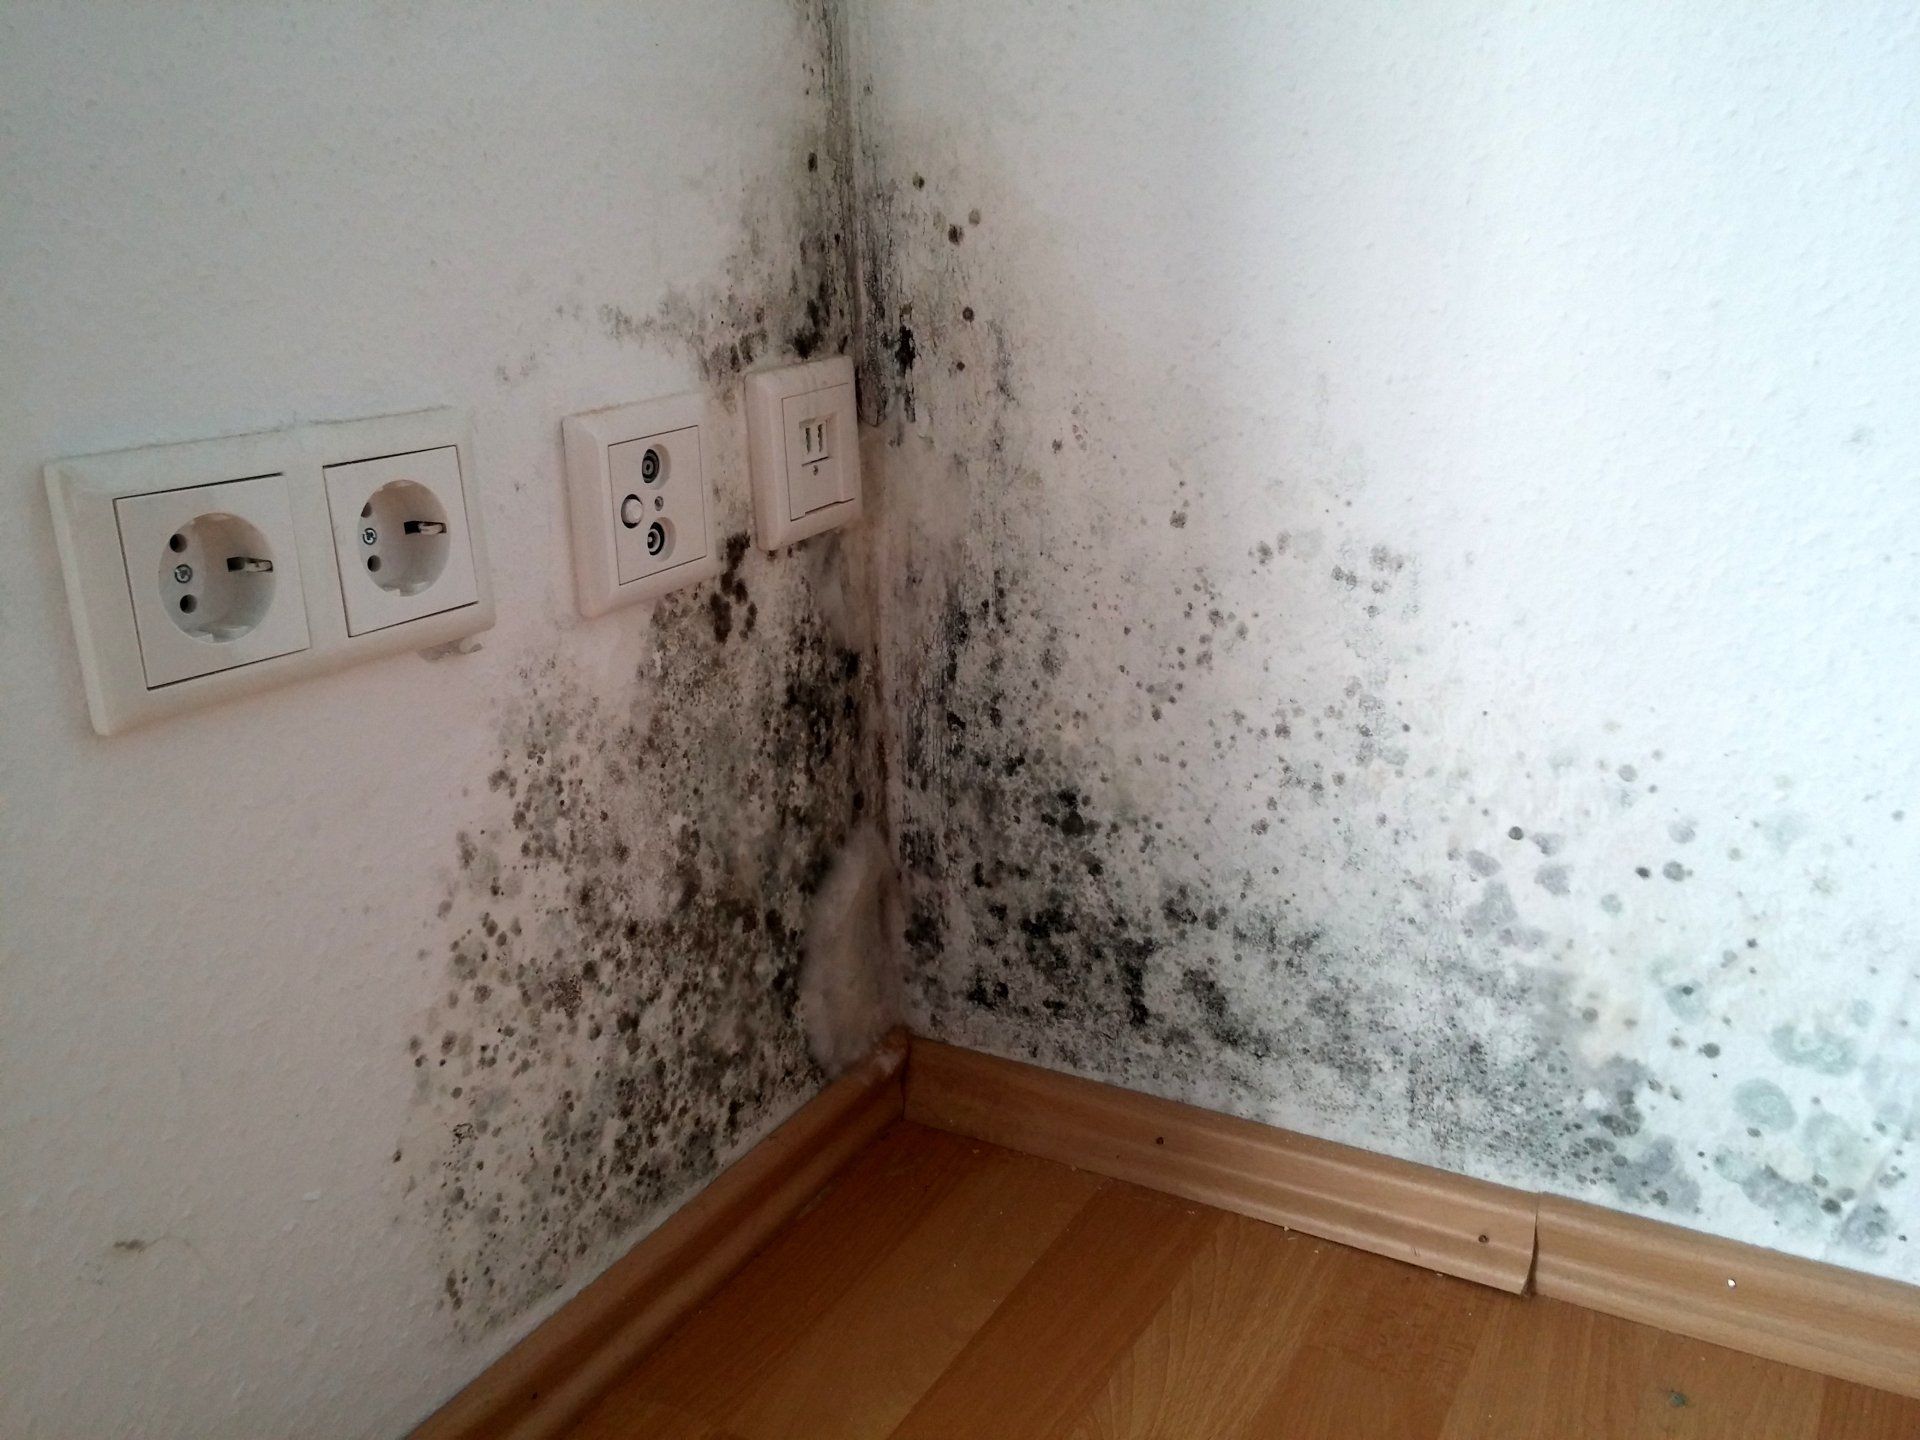 Mold on the wall socket and white wall